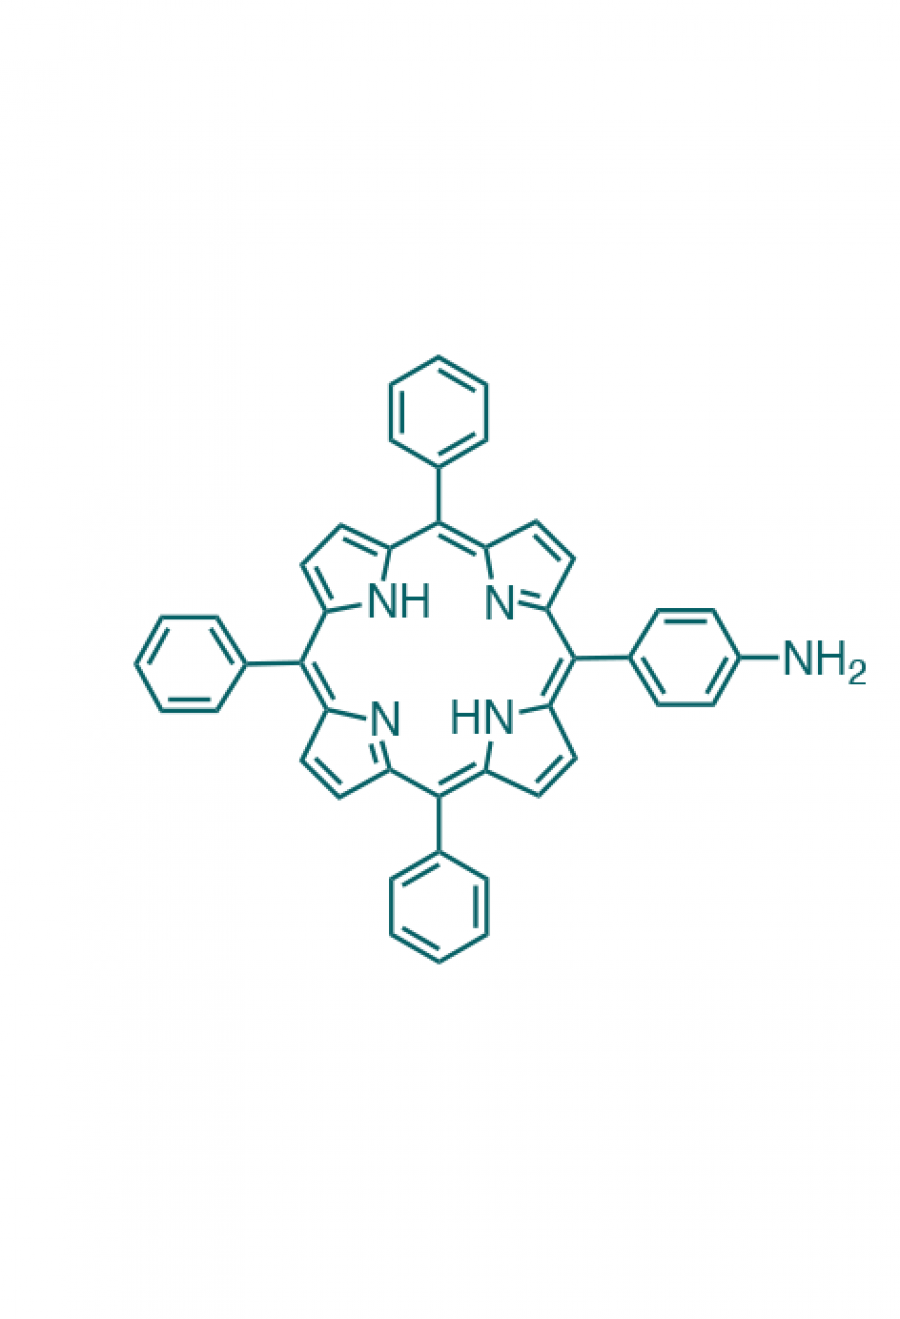 5-(4-aminophenyl)-10,15,20-(triphenyl)porphyrin  | Porphychem Expert porphyrin synthesis for research & industry